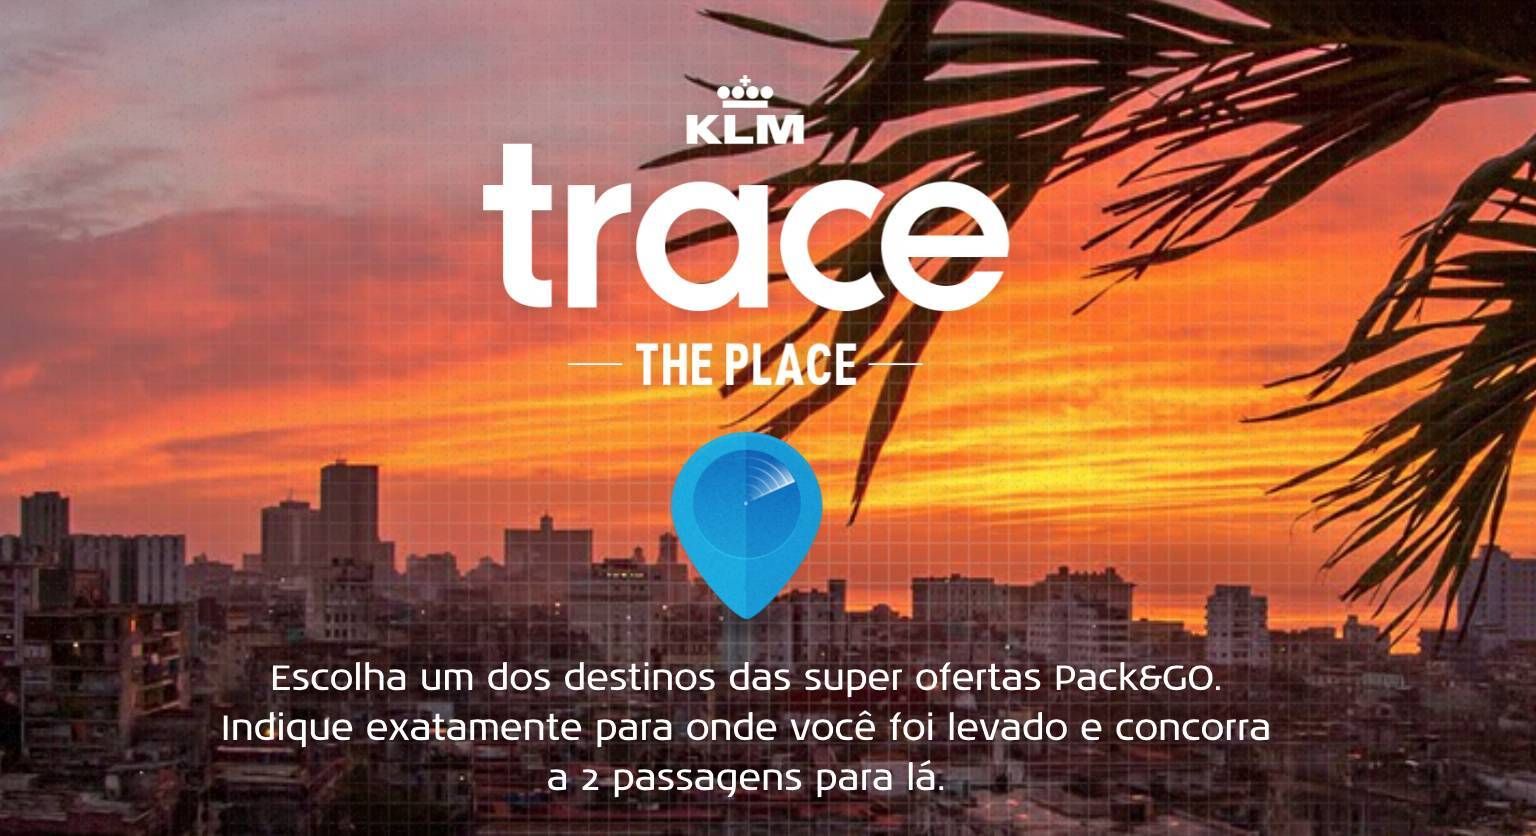 klm trace the place passageirodeprimeira